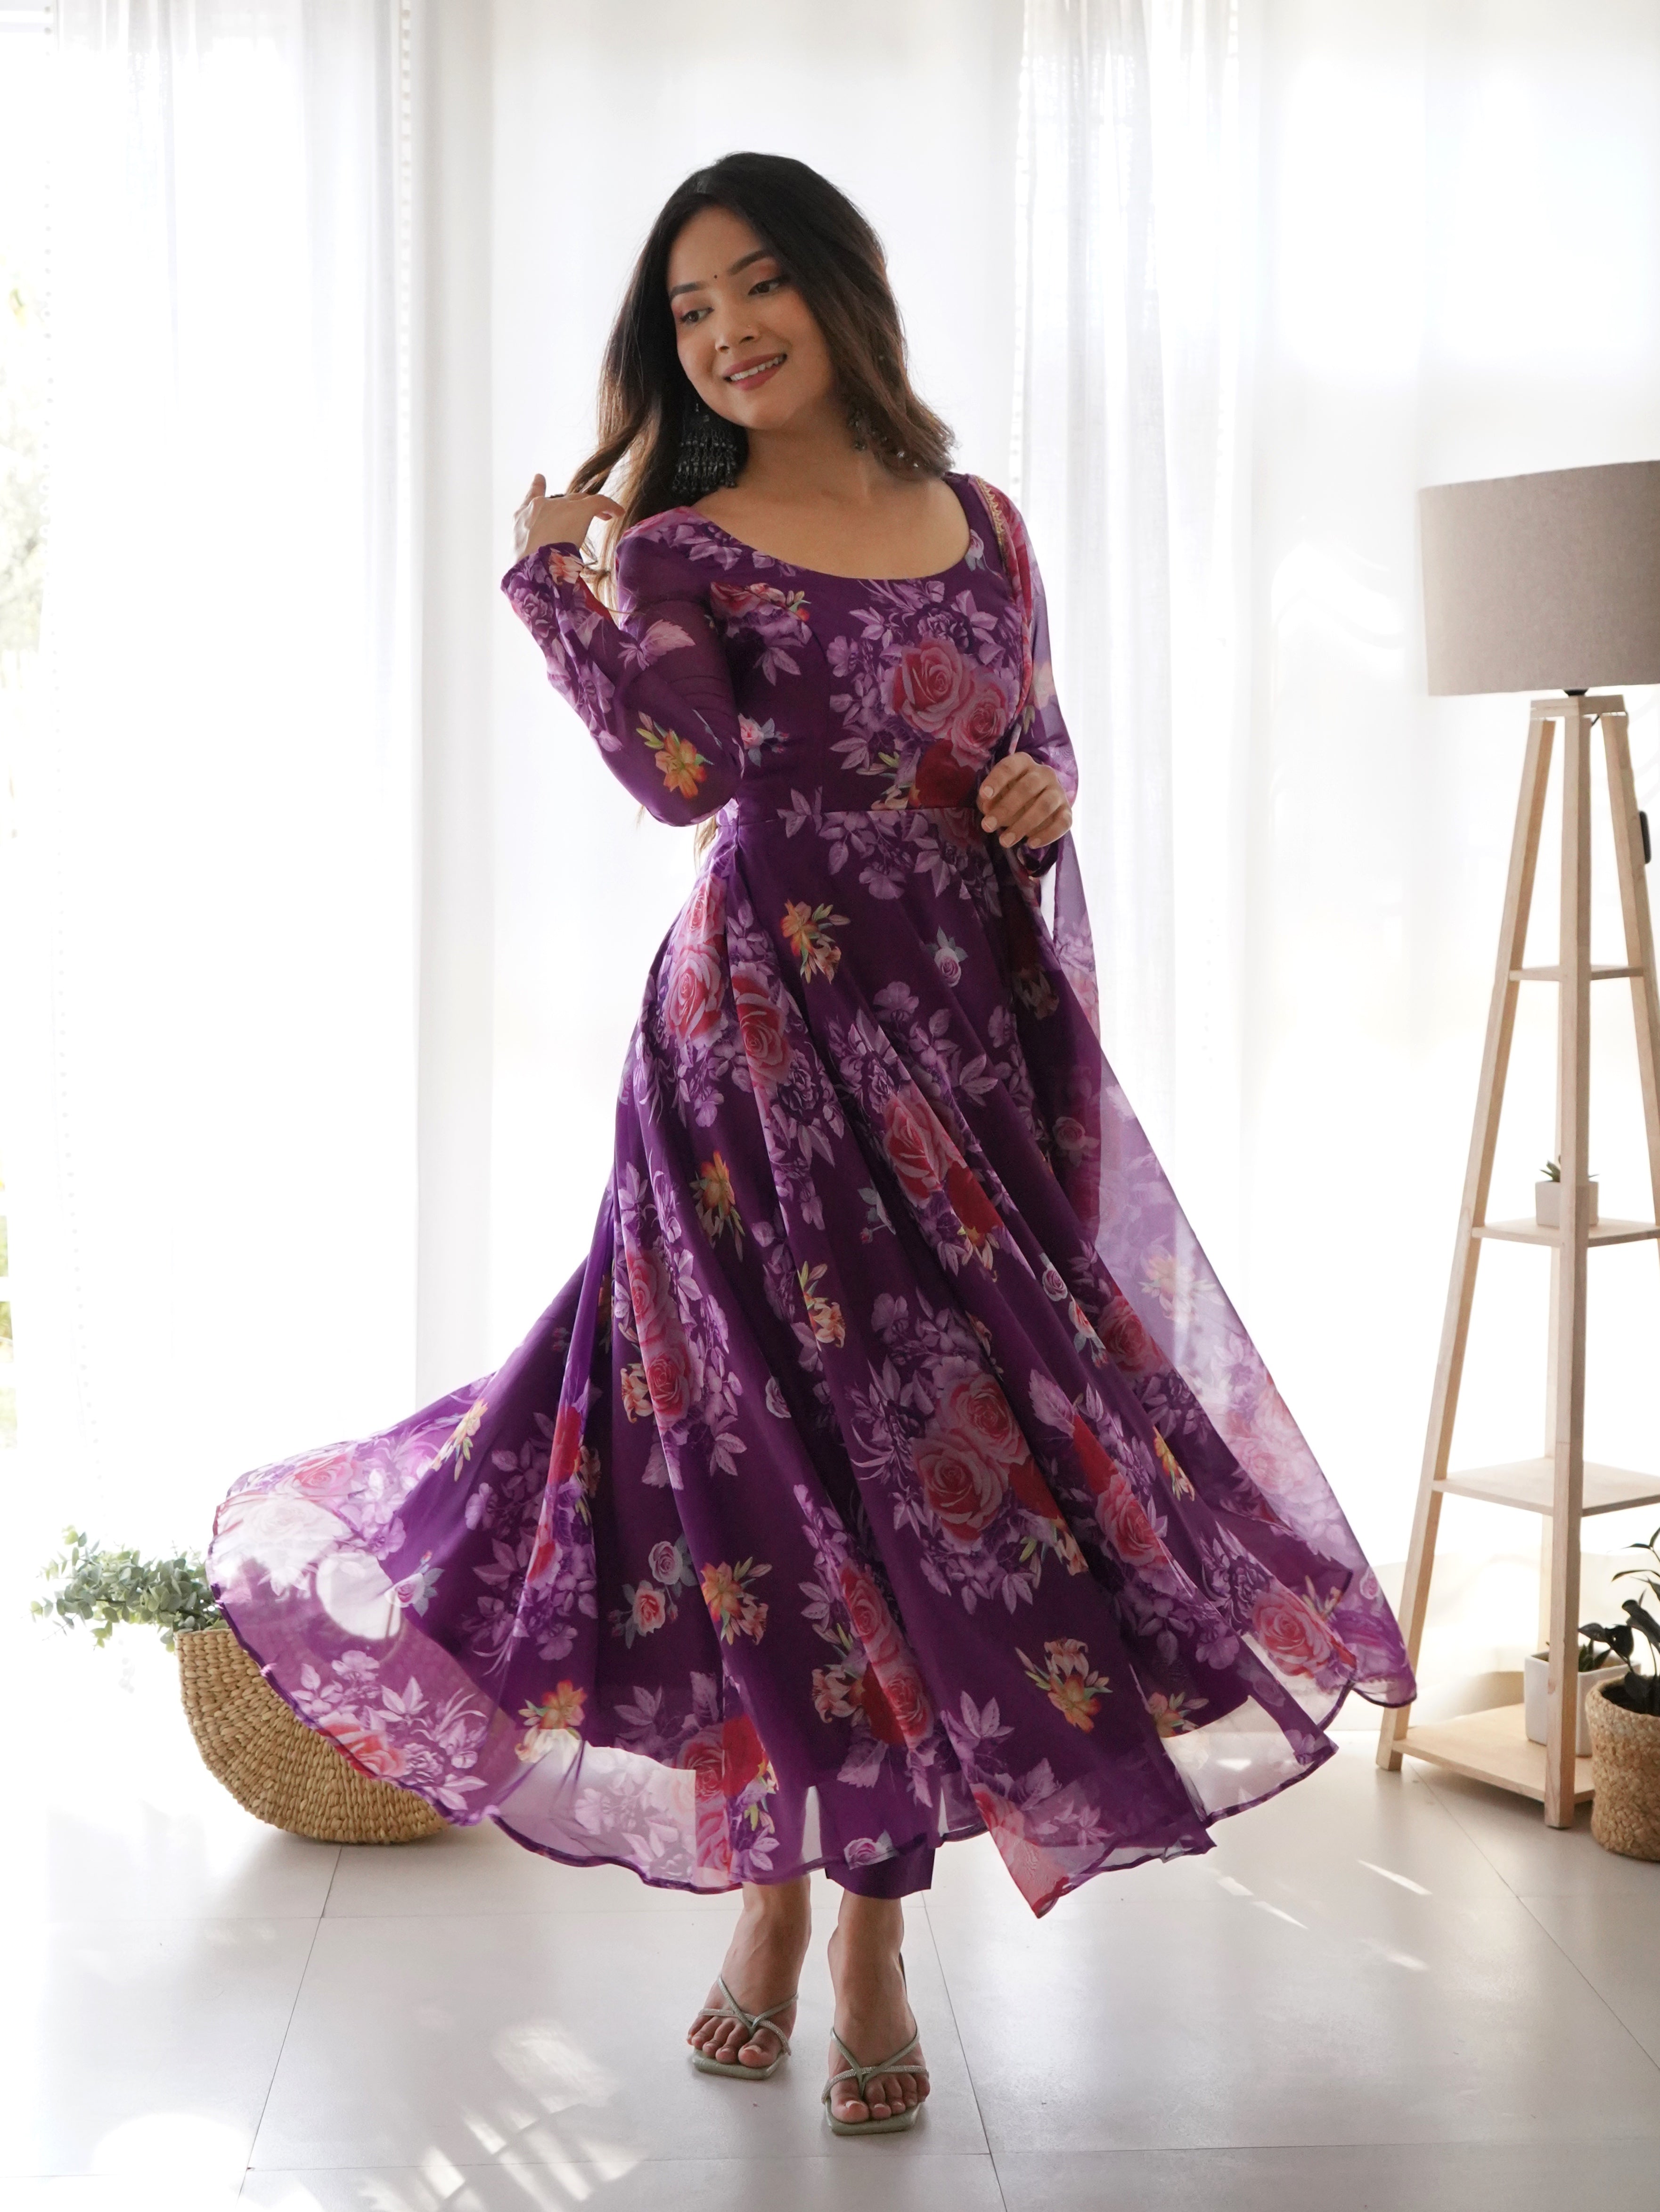 Beautiful Floral Frock Long Sleeve Party Dress One Piece Female Outfits